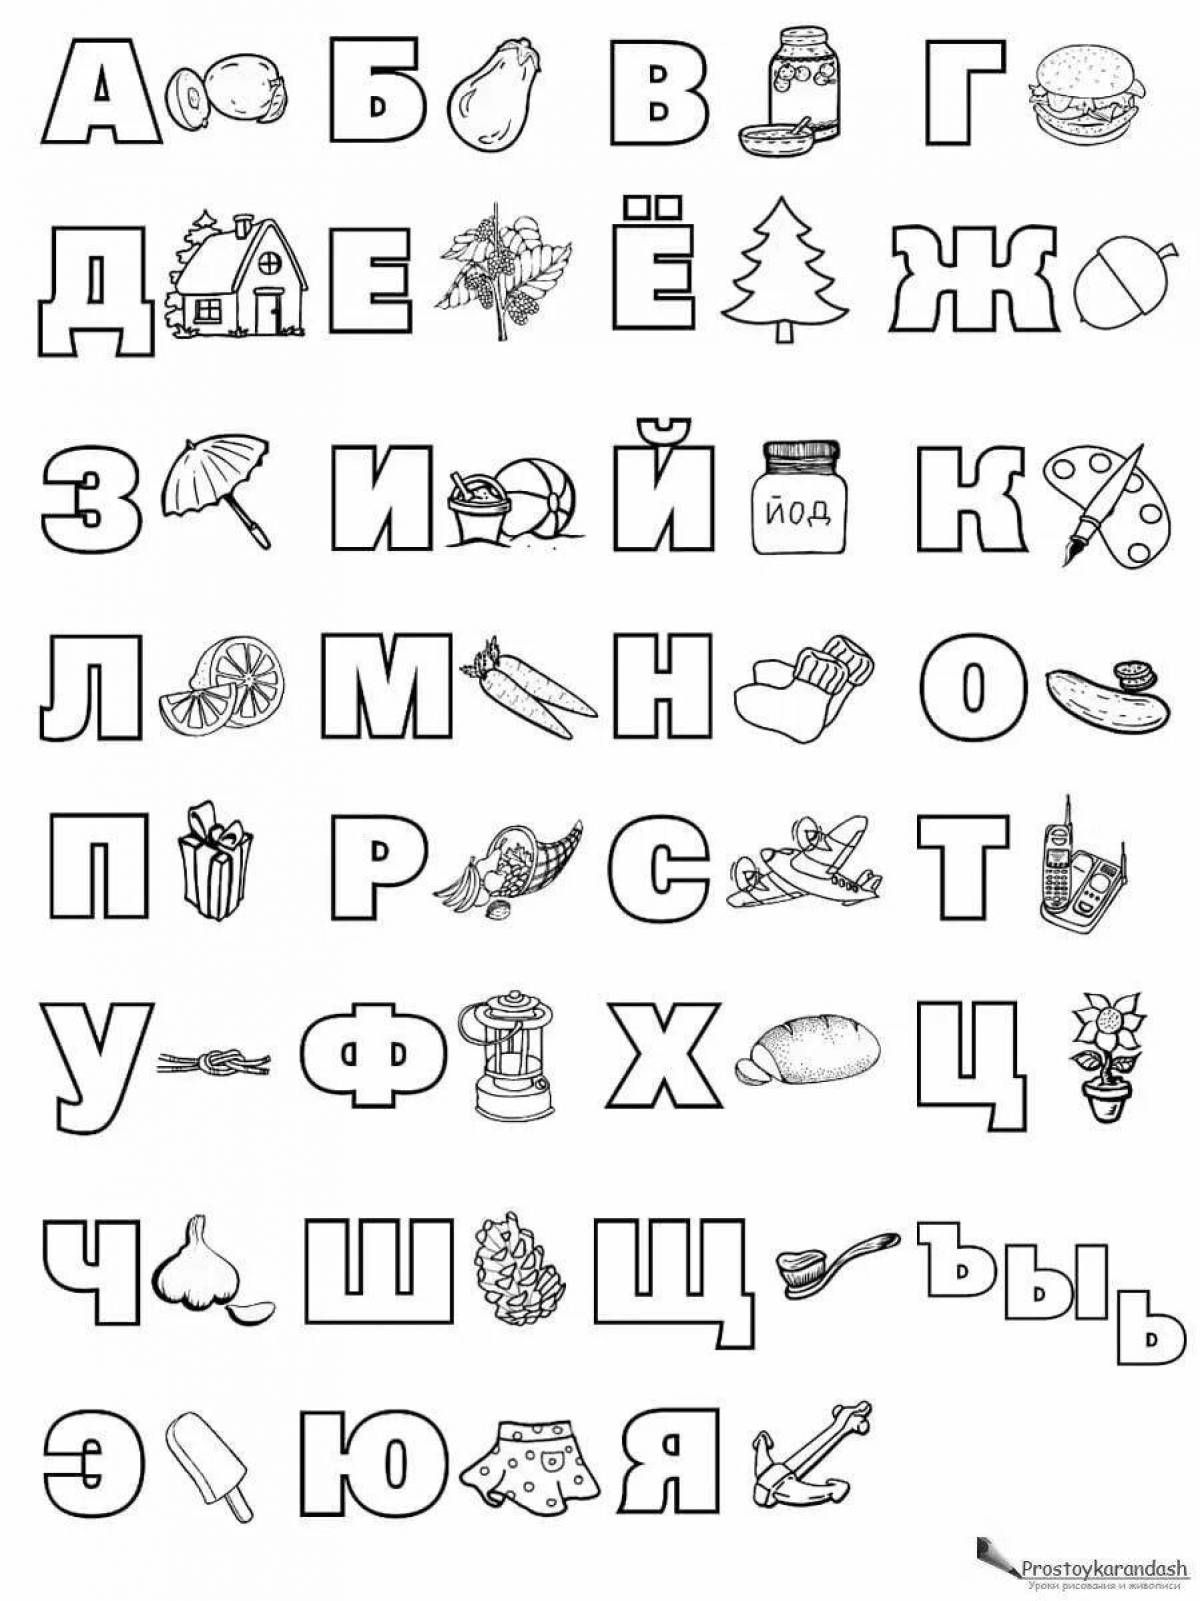 Russian letters for children #3